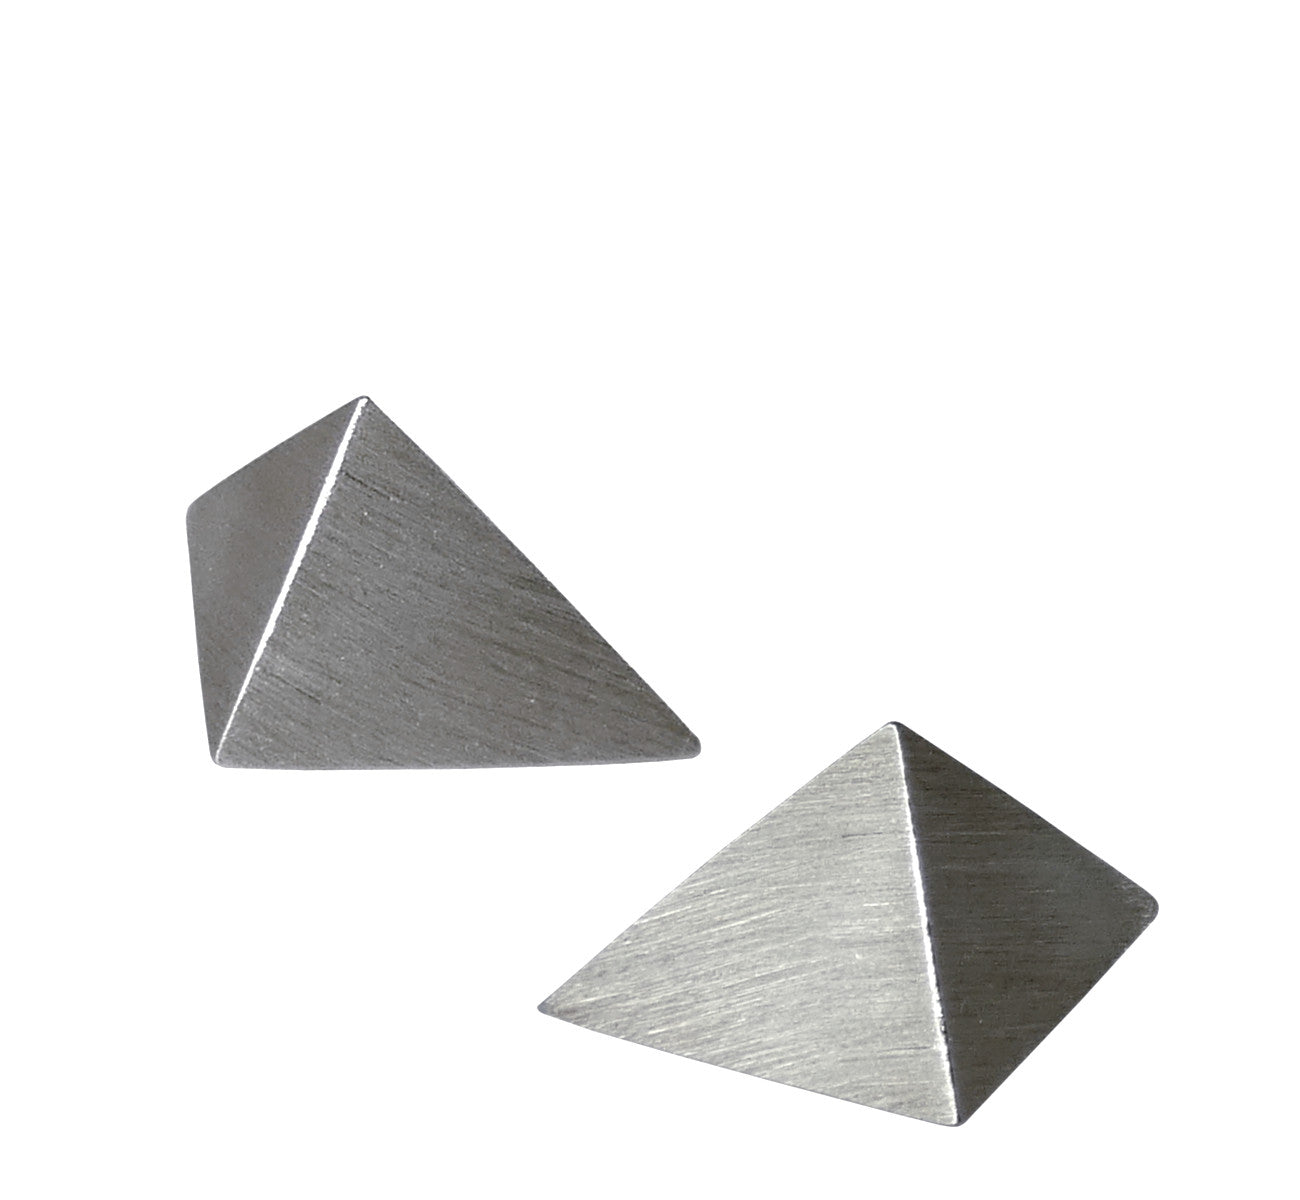 Diamond shaped geometric silver stud earrings, matte surface with glossy sides, length 1.65 cm, 0.65”, handcrafted.